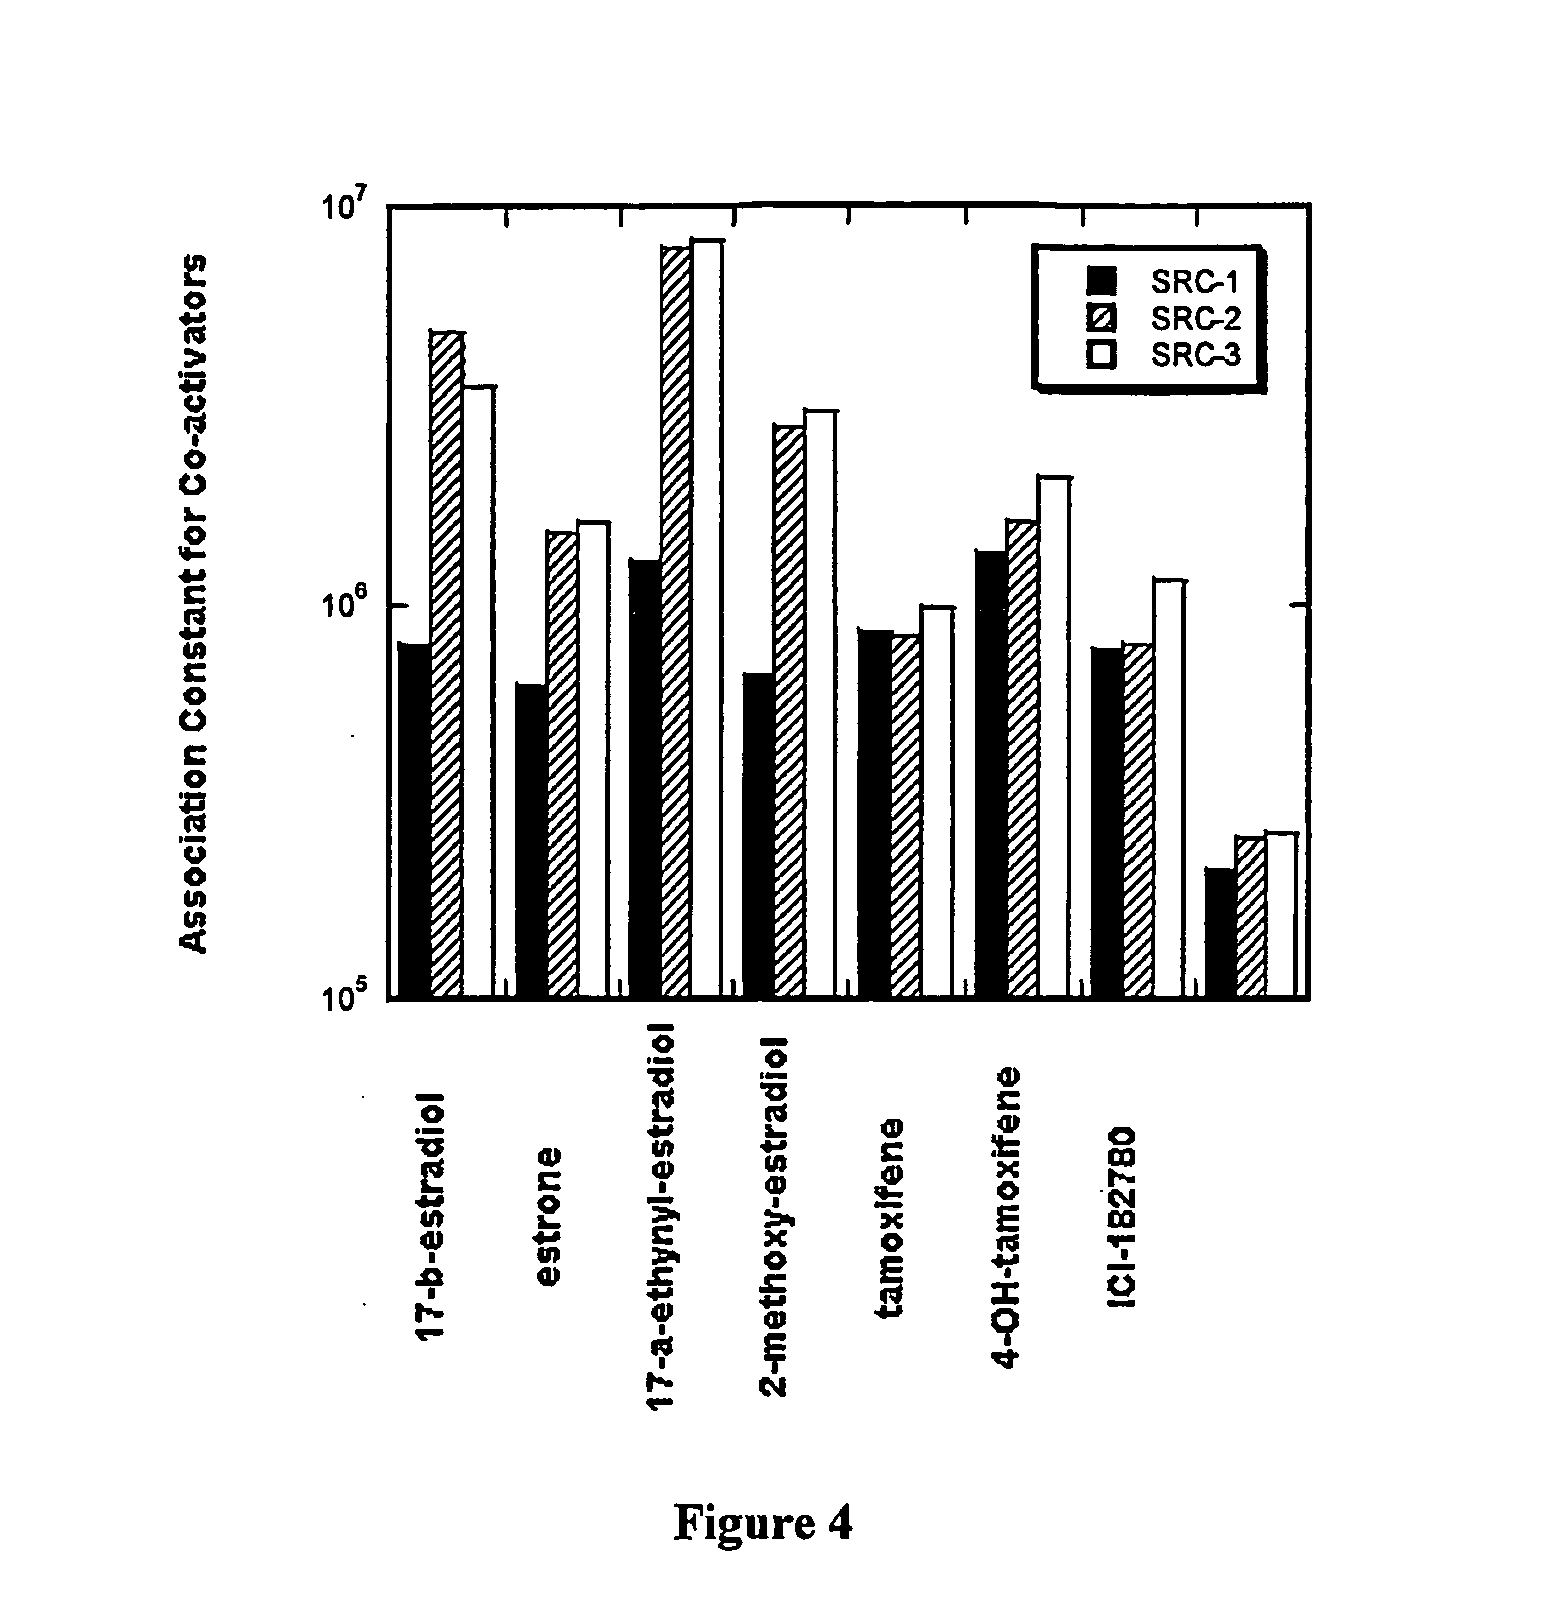 Method for the identification of ligands